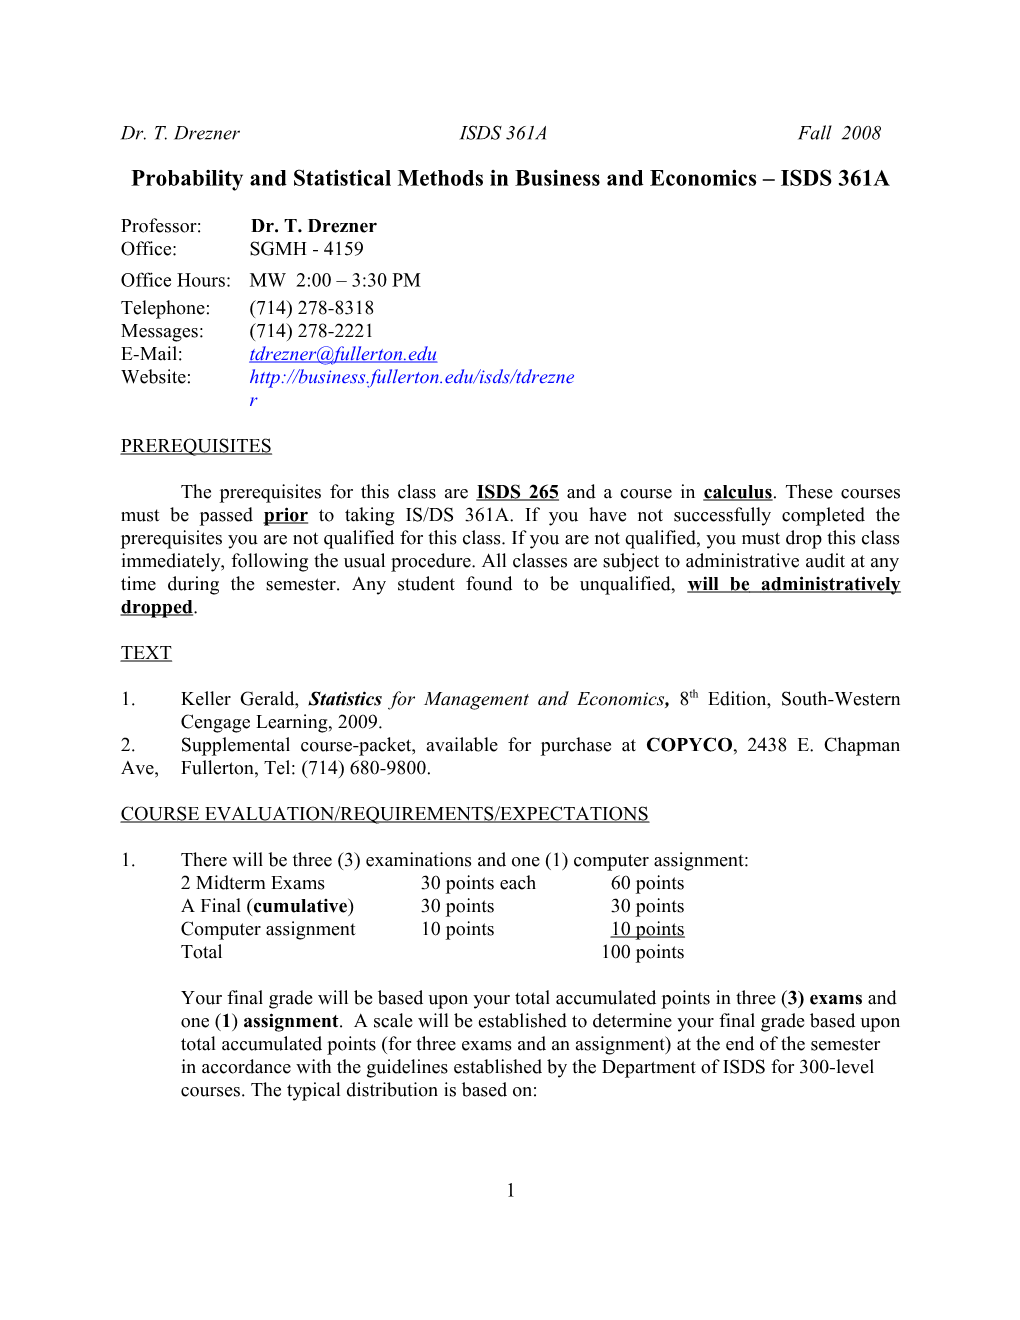 Probability and Statistical Methods in Business and Economics ISDS 361A